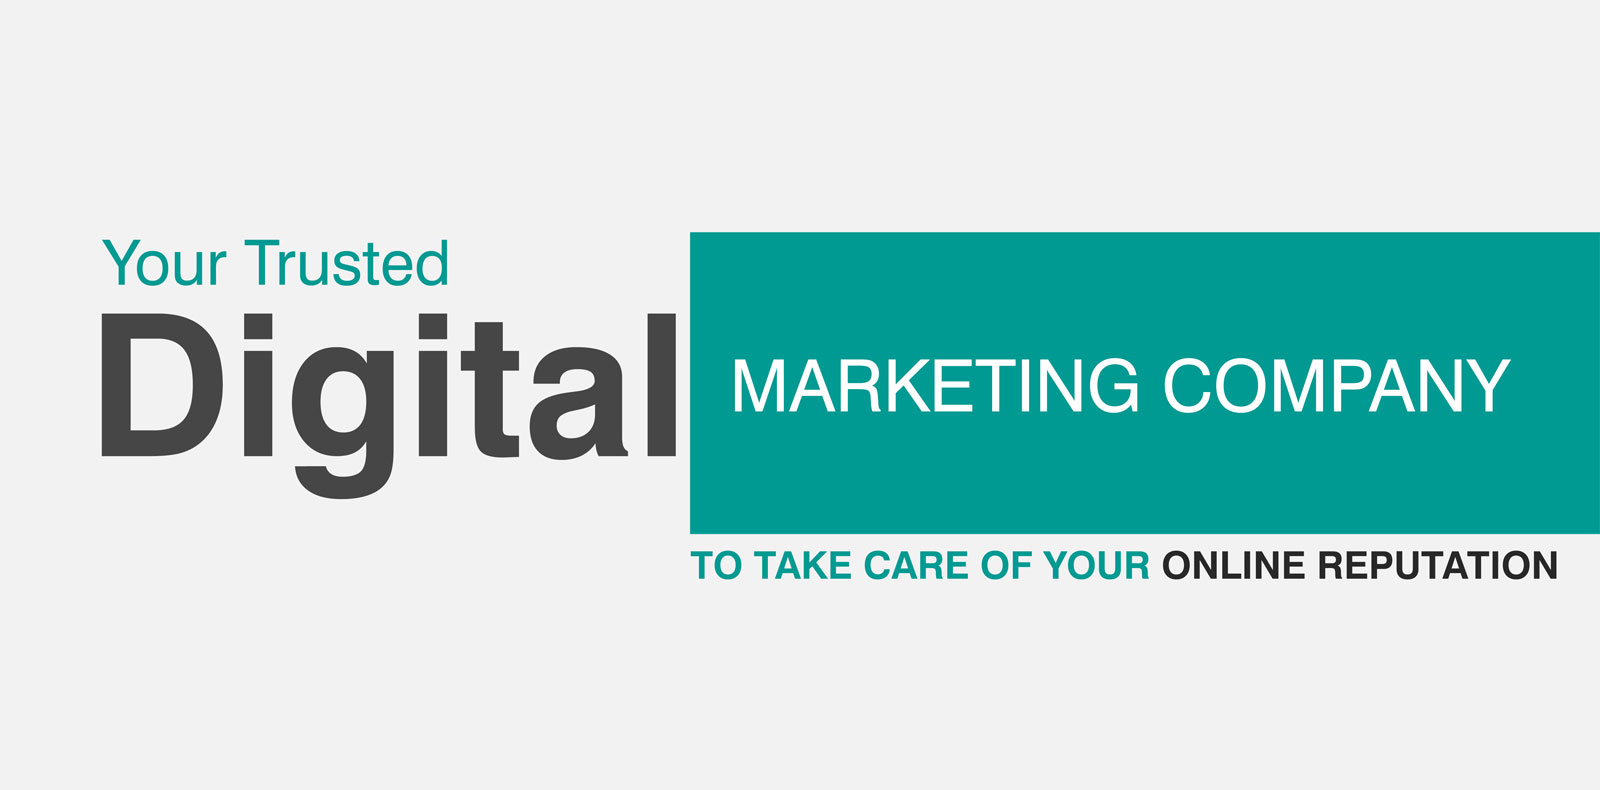 Your Trusted Digital Marketing Company